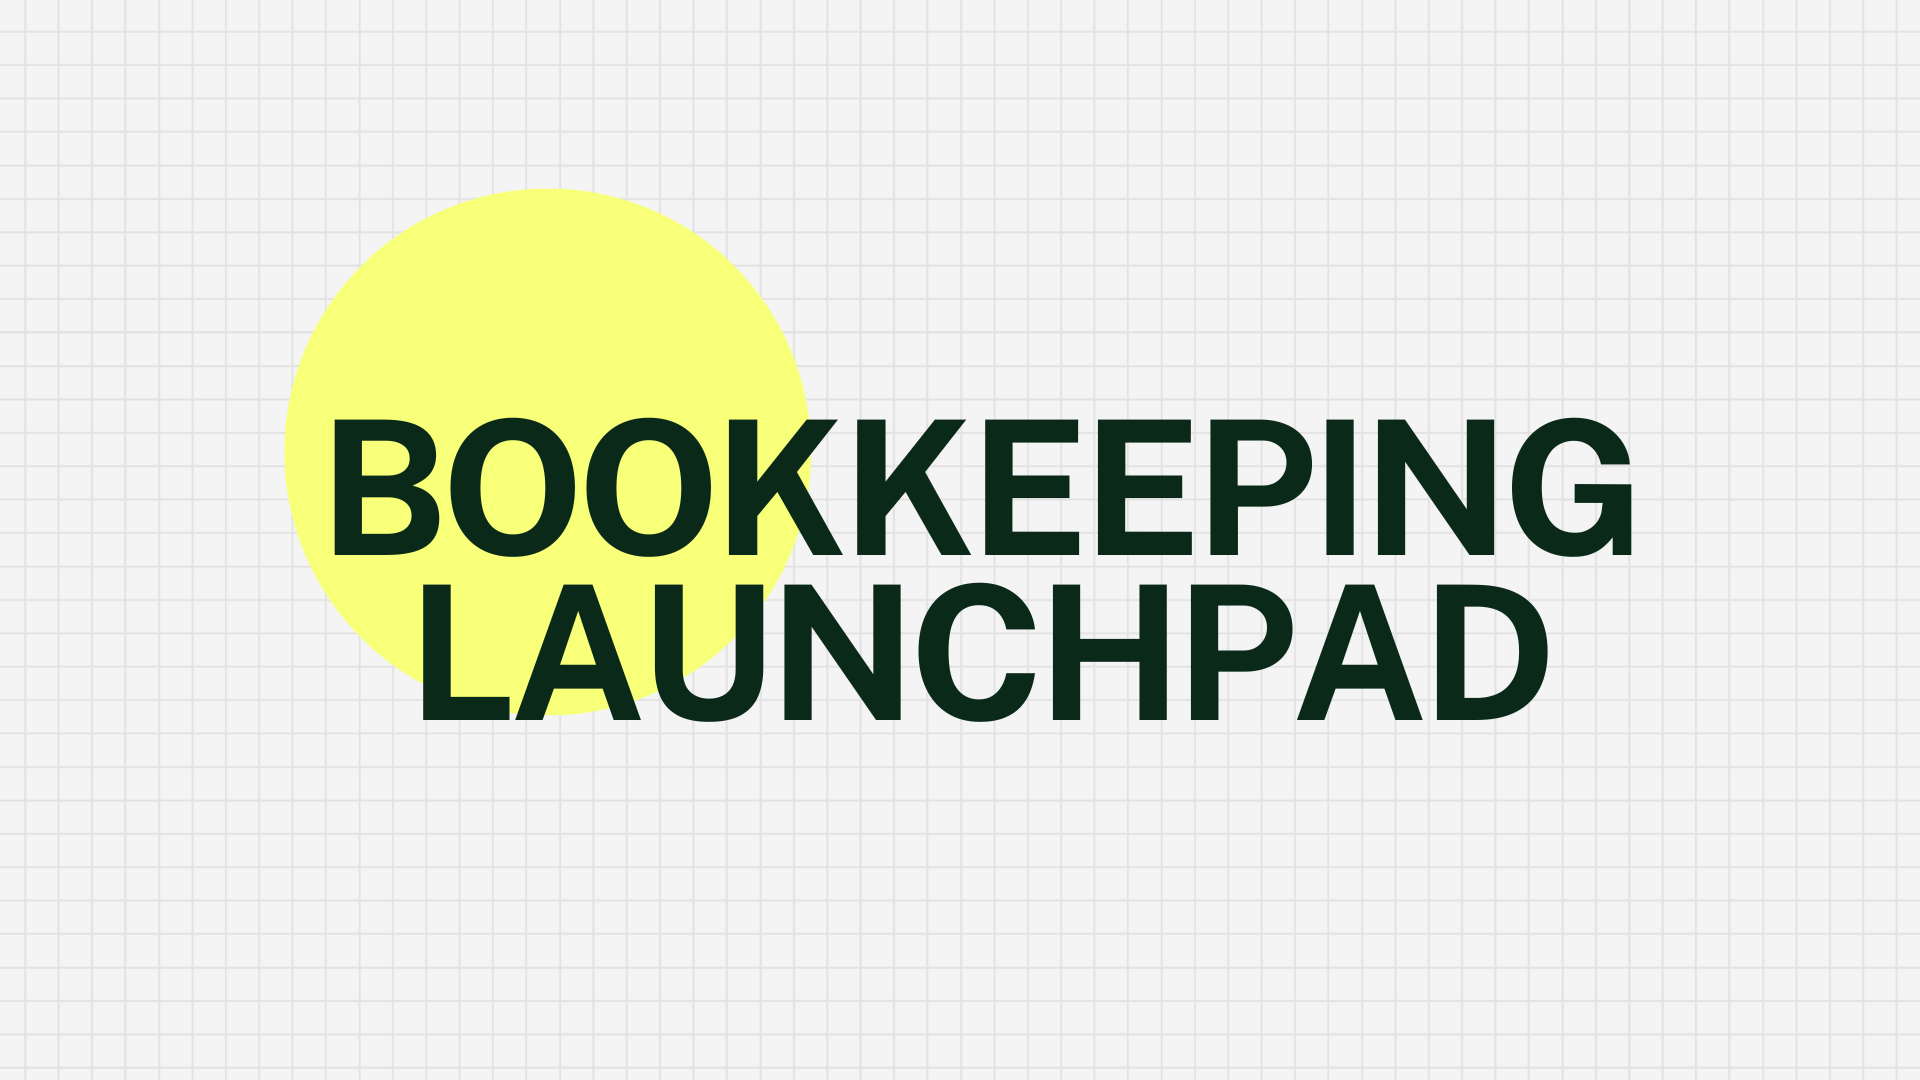 Bookkeeping Launchpad